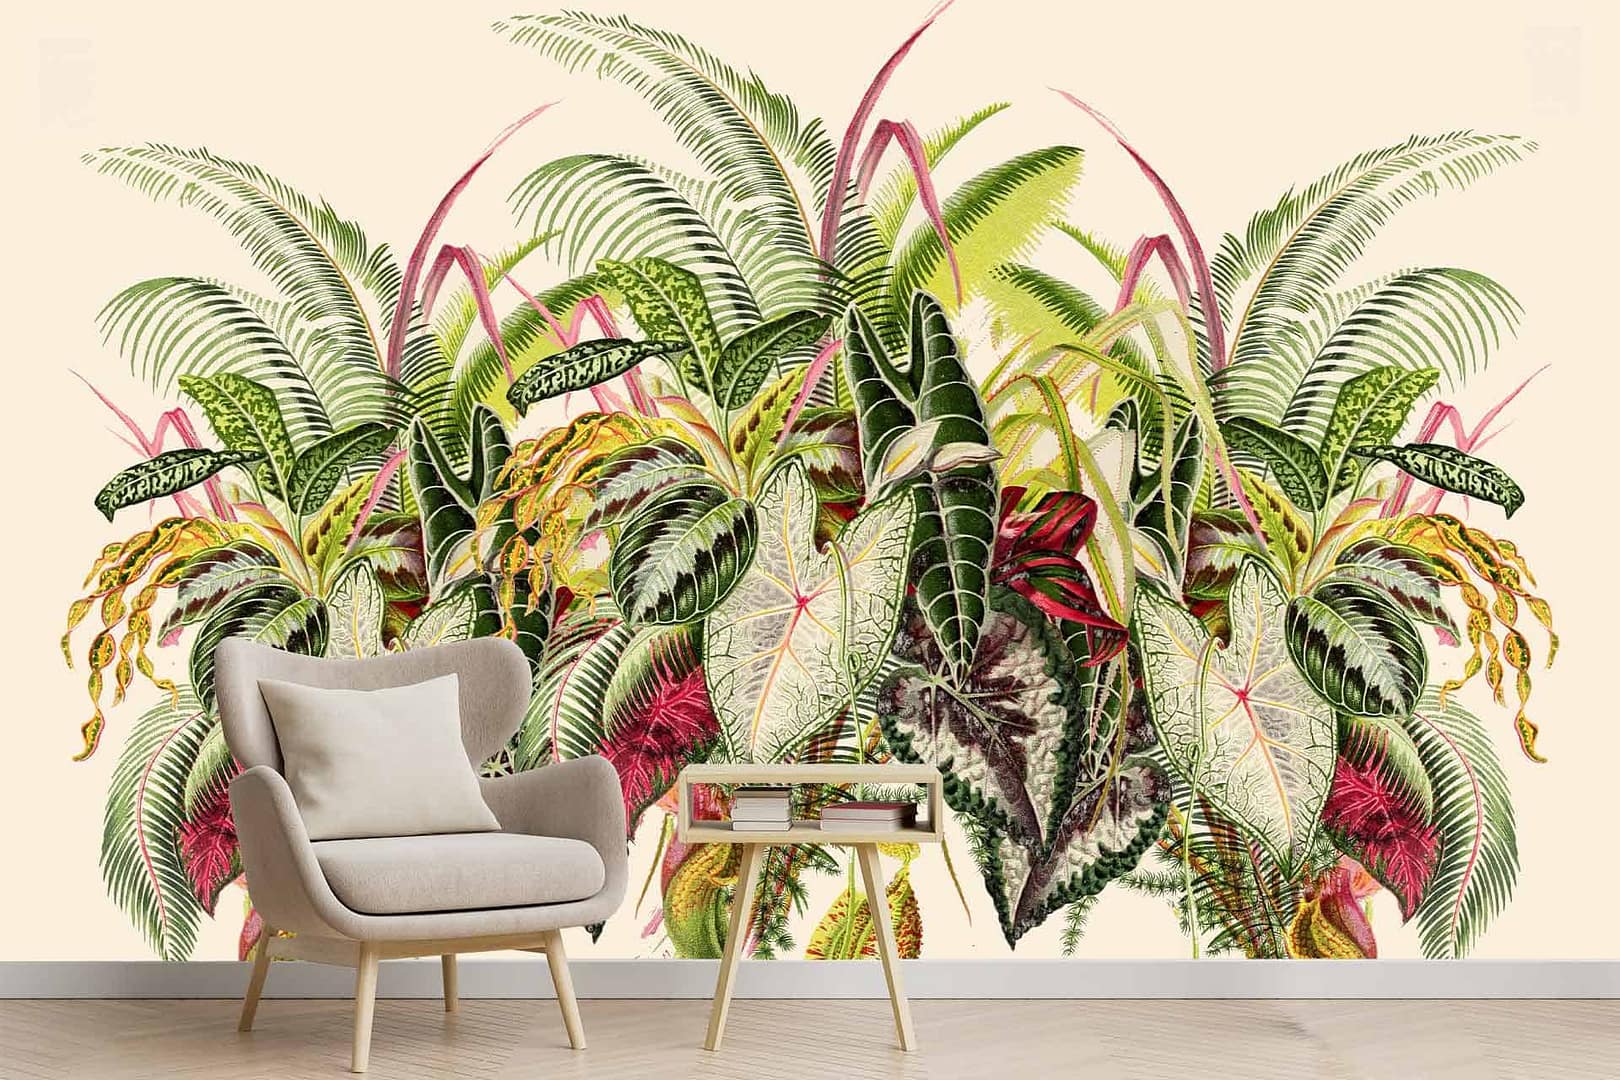 Foliage Bouquet - a wallpaper made up of a variety of colourful oversized leaves by Cara Saven Wall Design